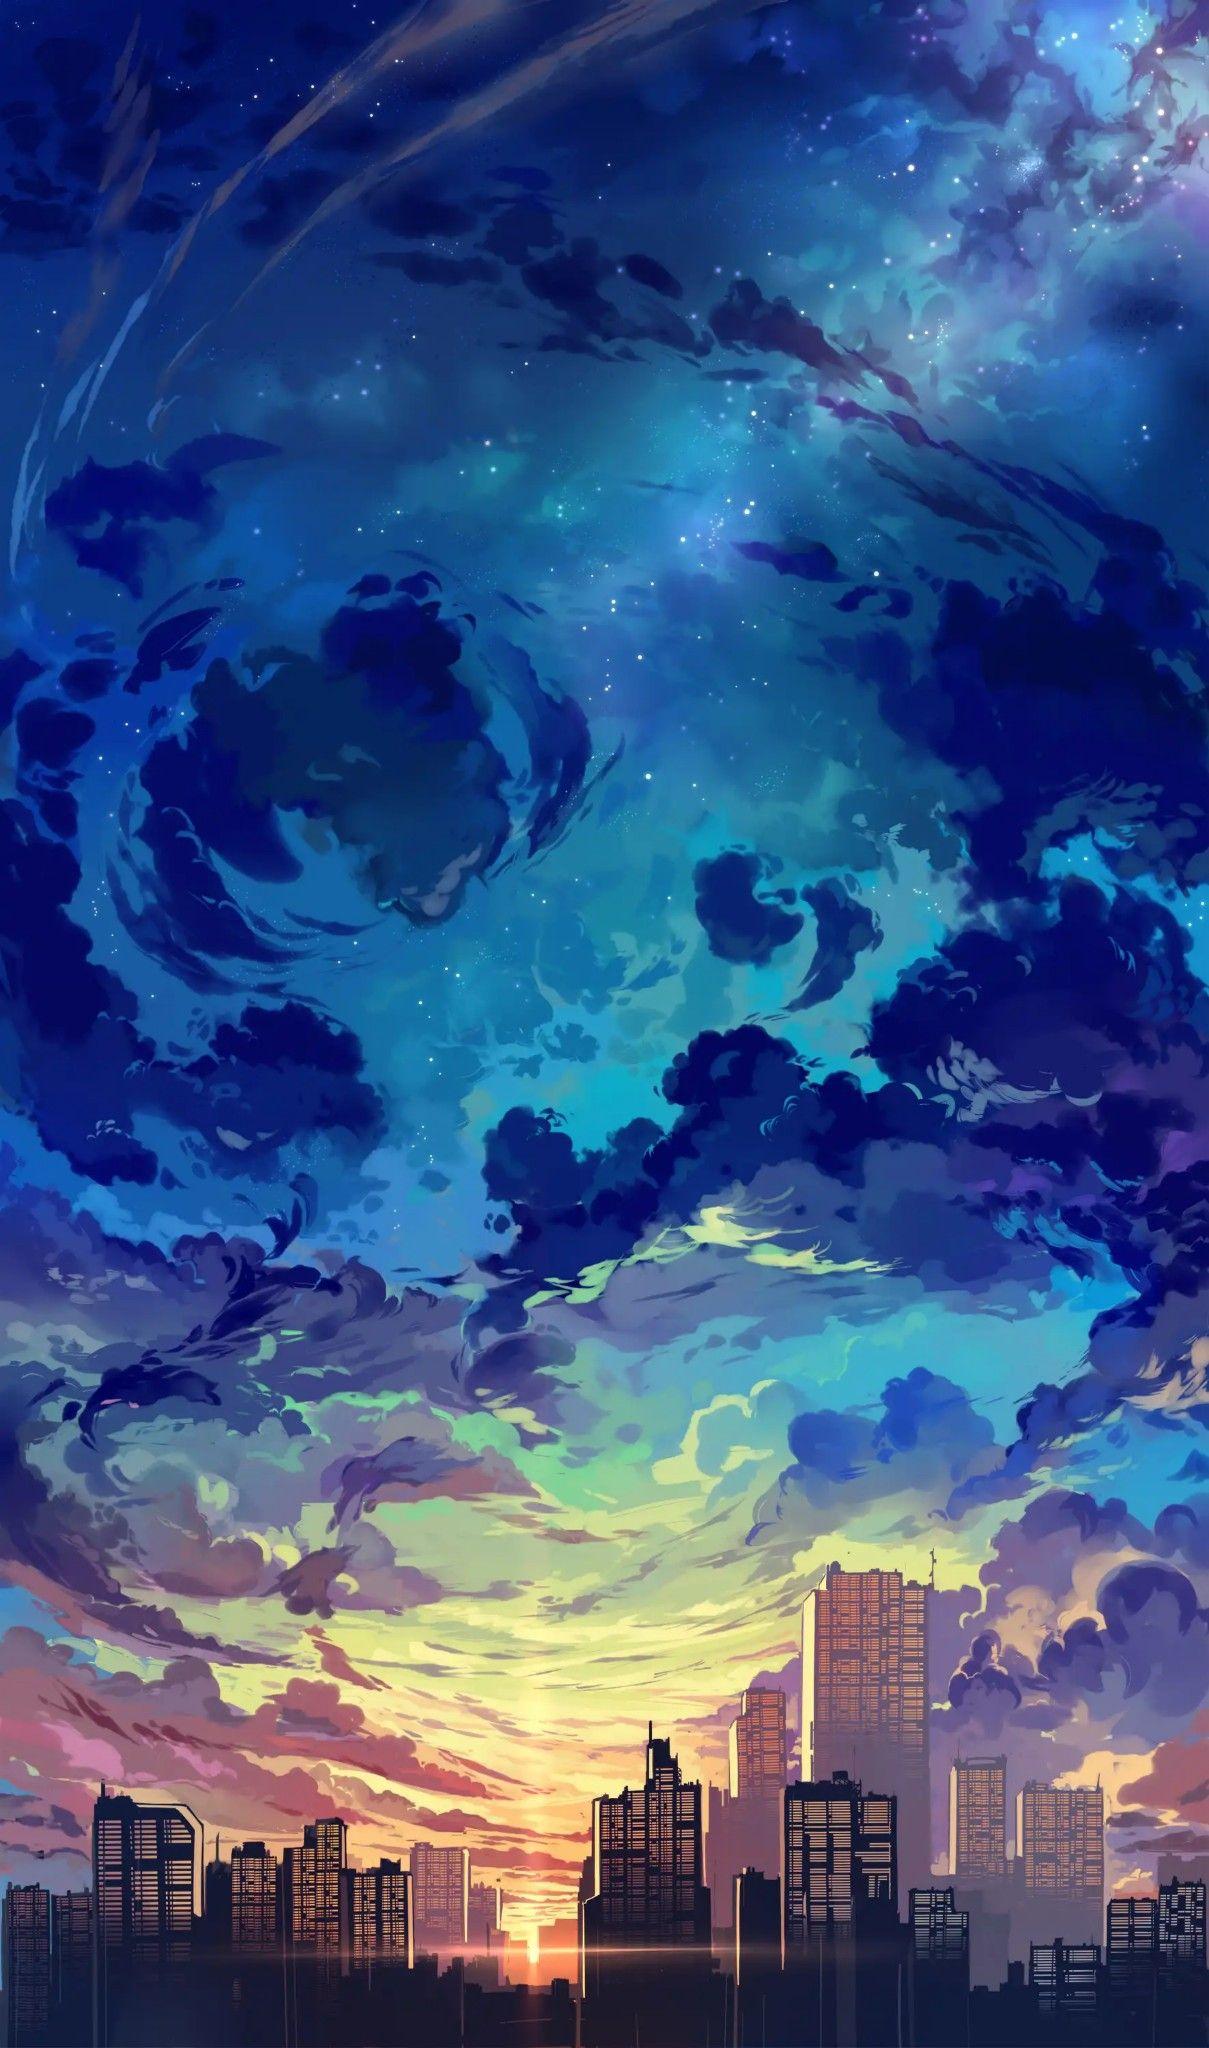 Anime Scenery Android Wallpapers - Wallpaper Cave